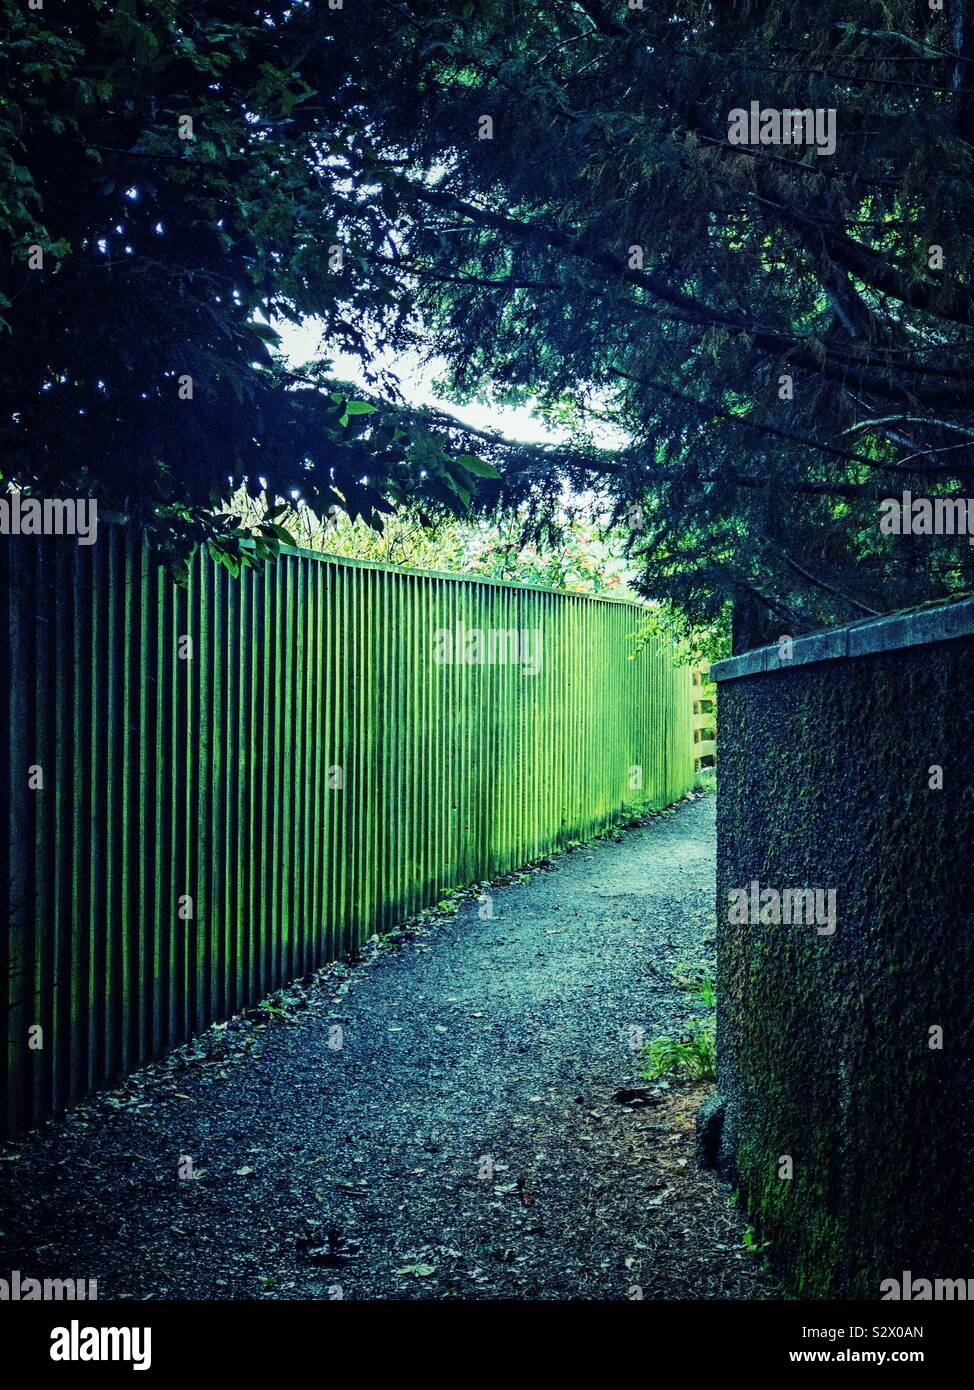 Green fence next to path with trees. Stock Photo